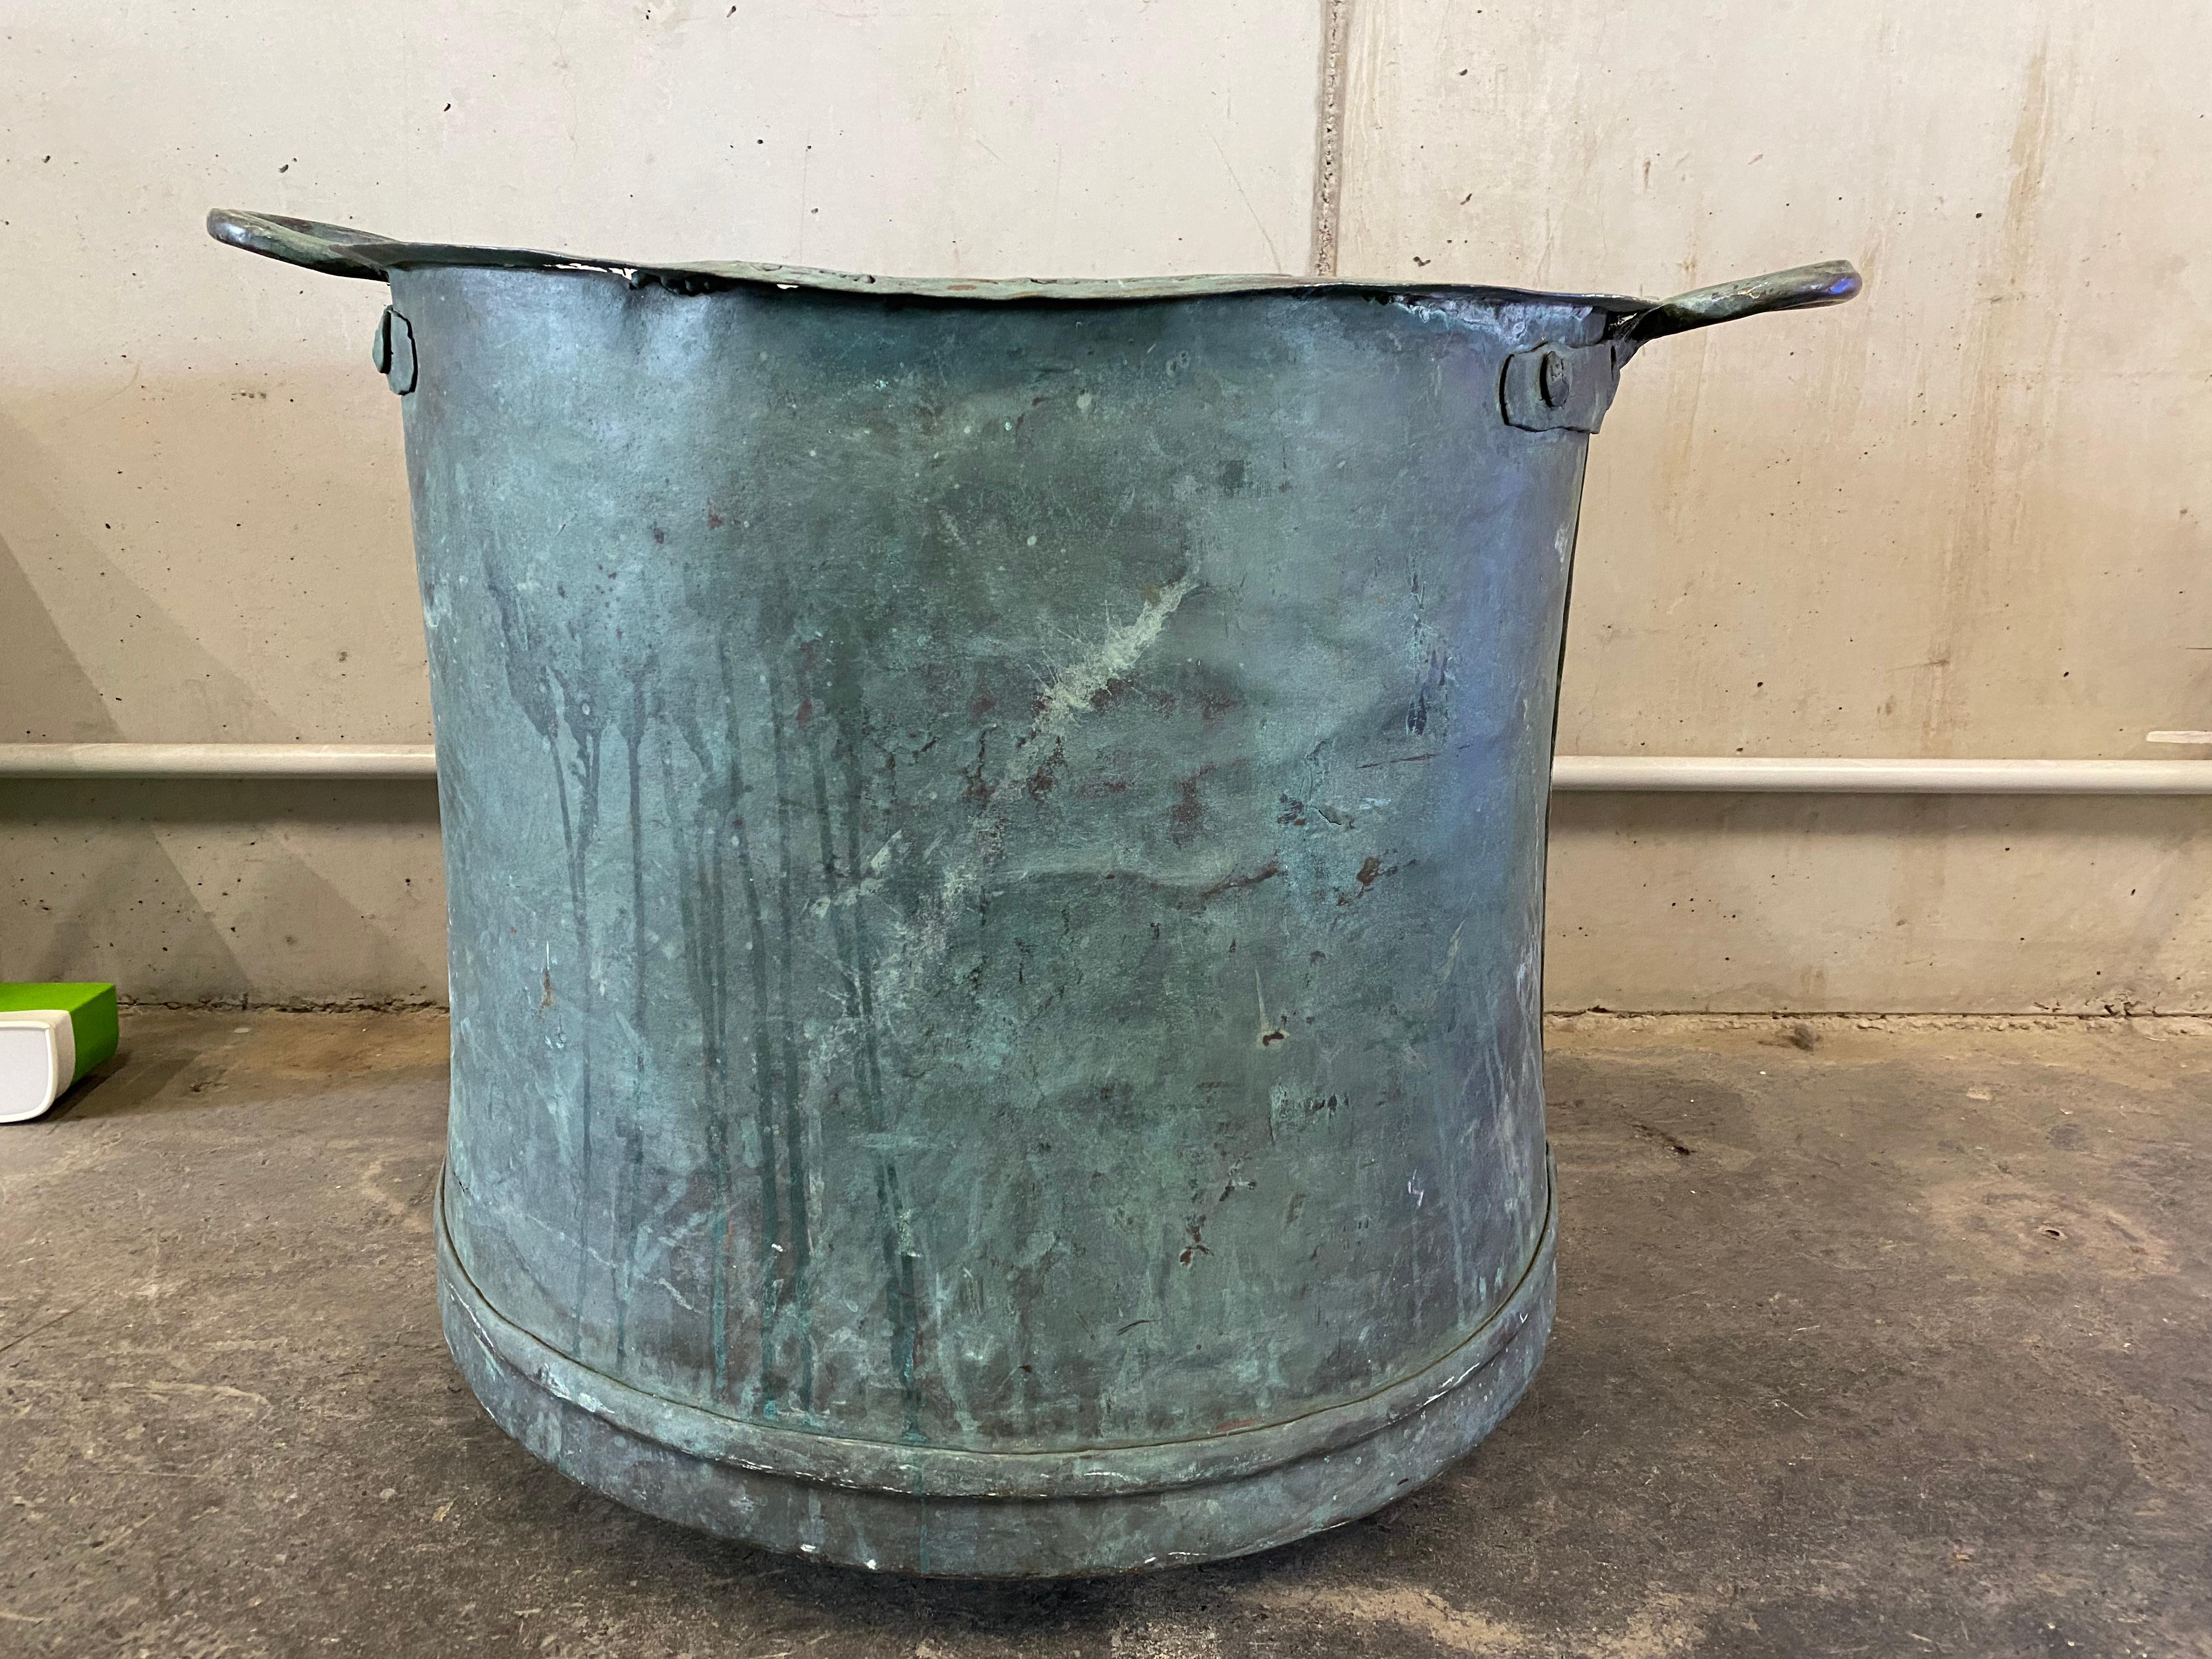 Unique copper bucket from the 1800's. The copper has oxidized over the years and developed a beautiful patina. The riveted handles also suggest the age of the bucket. In addition, they are a very nice detail on the antique piece. The bottom of the